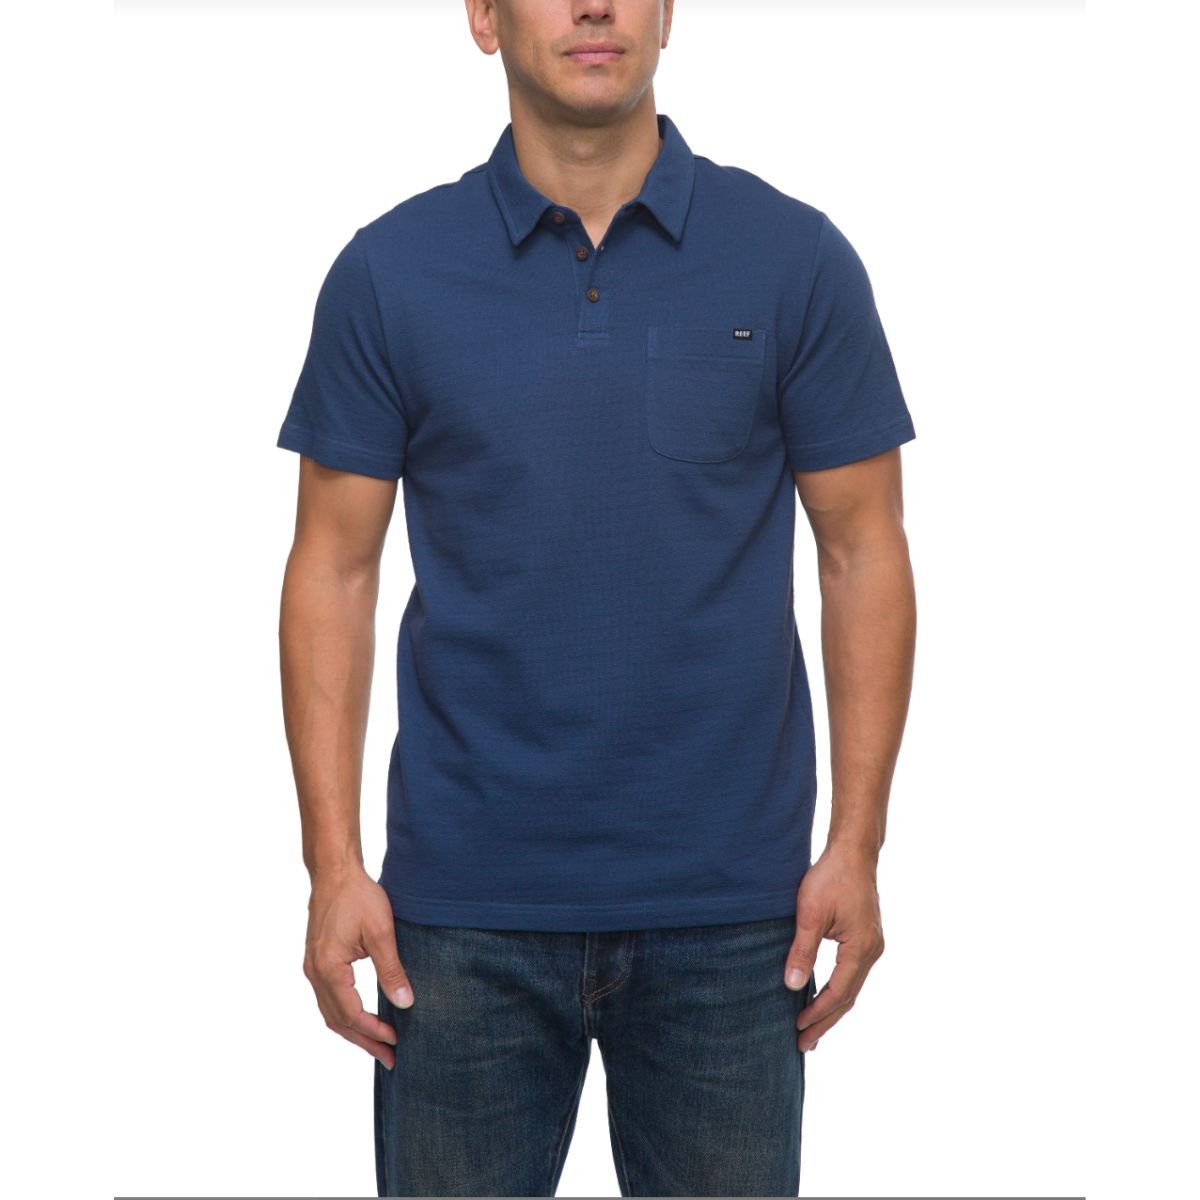 Reef Atwell Short Sleeve Knit Polo in Insignia Blue - BoardCo